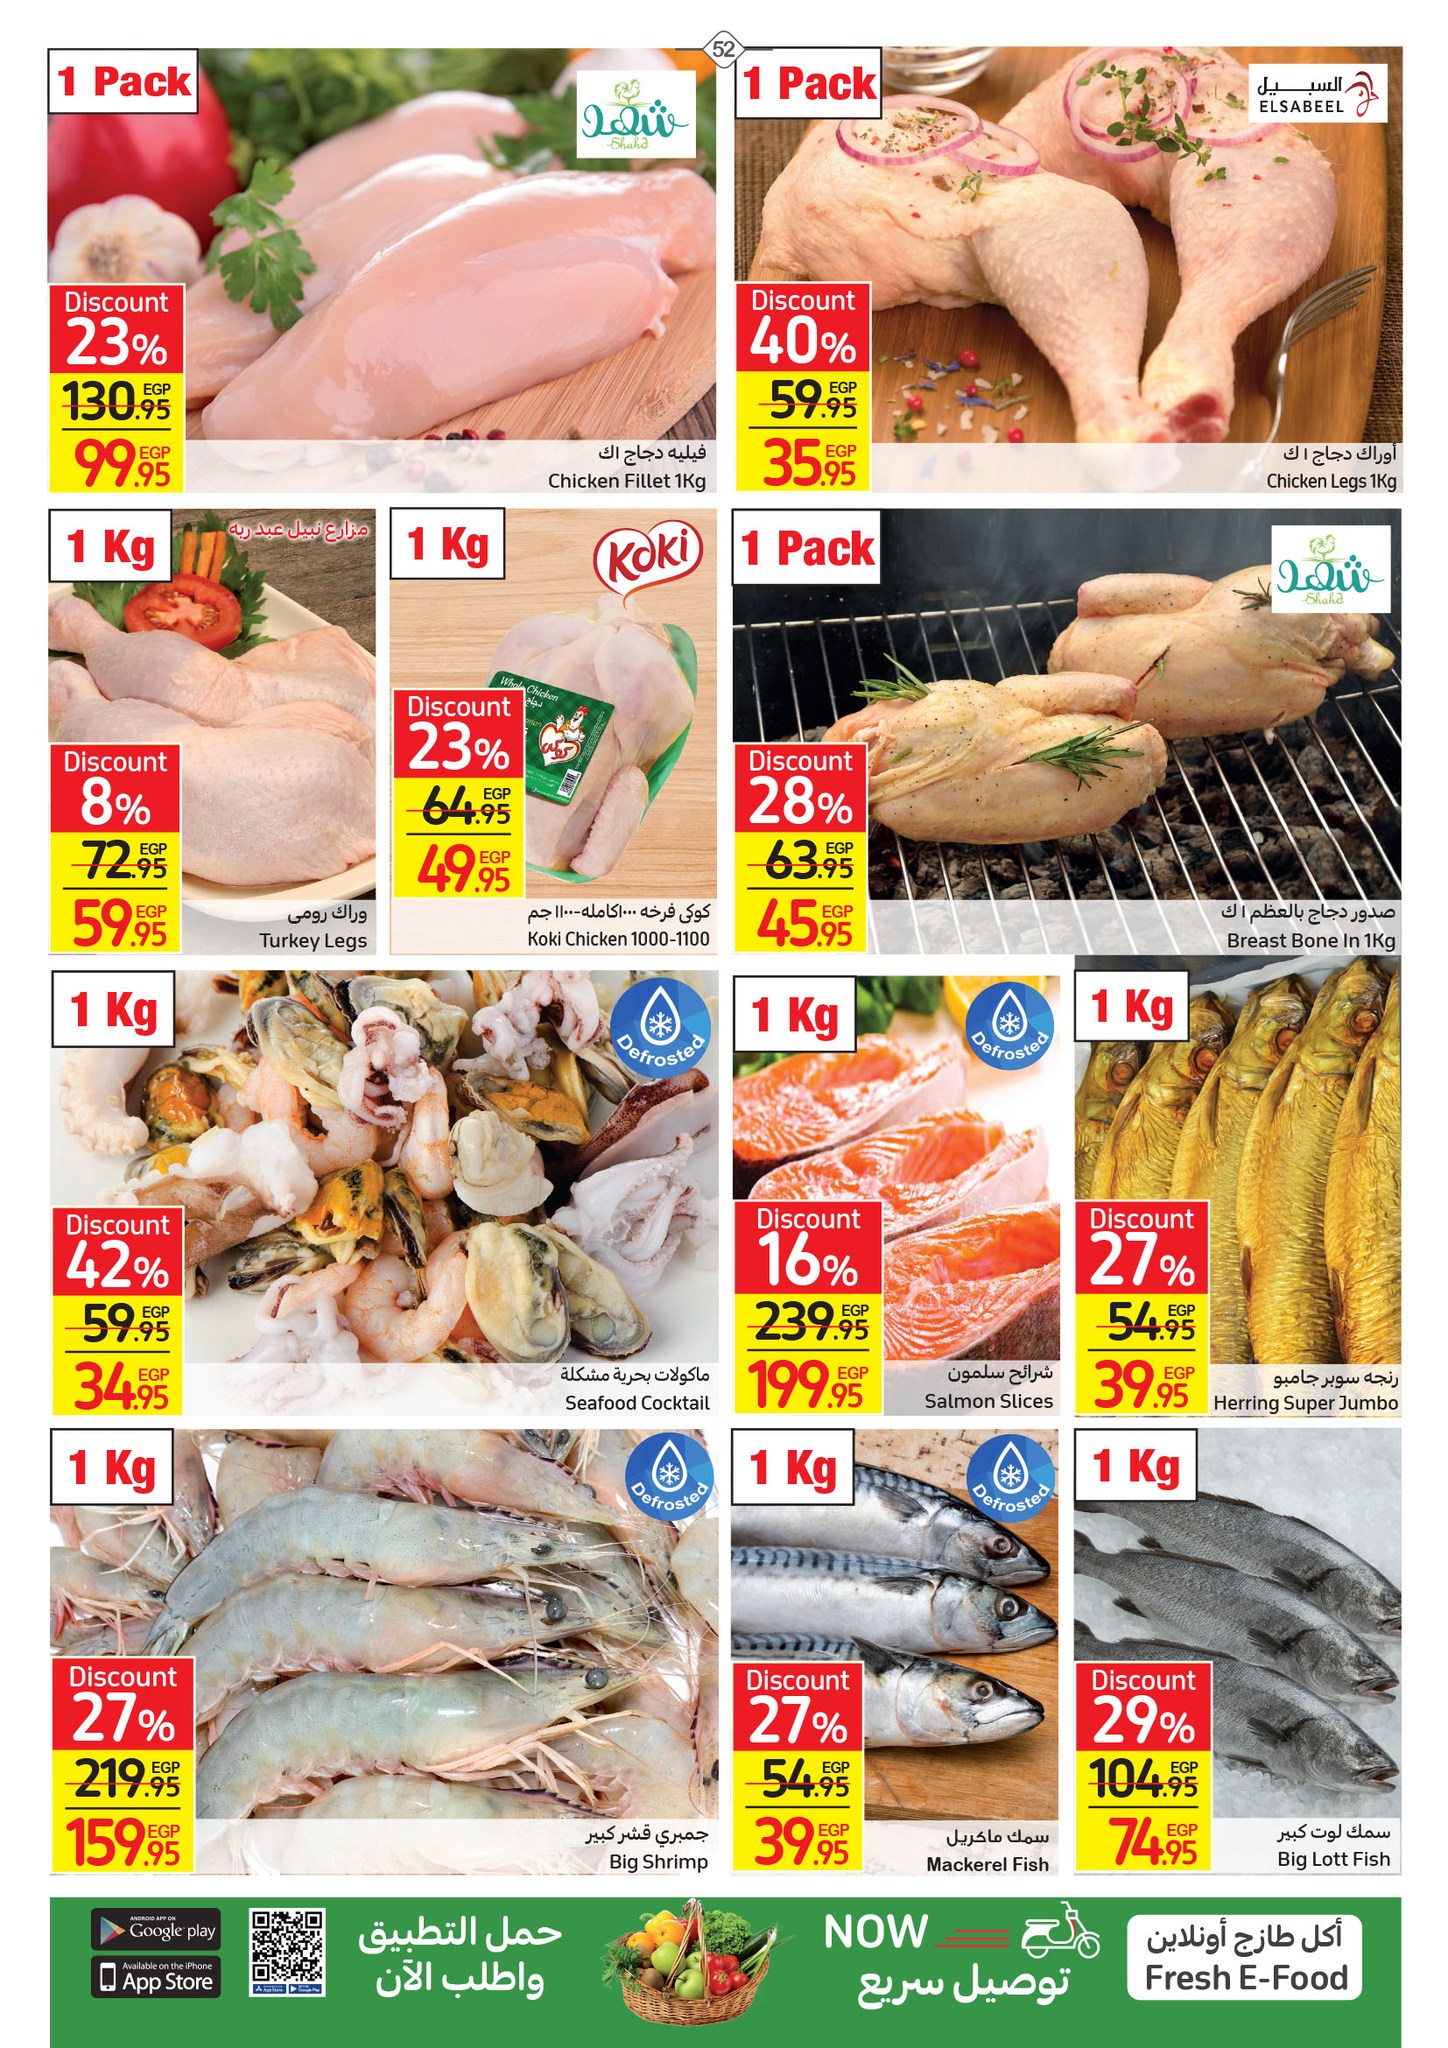 Watch the latest Carrefour half price offers "Last Chance Offer" until December 4, 52